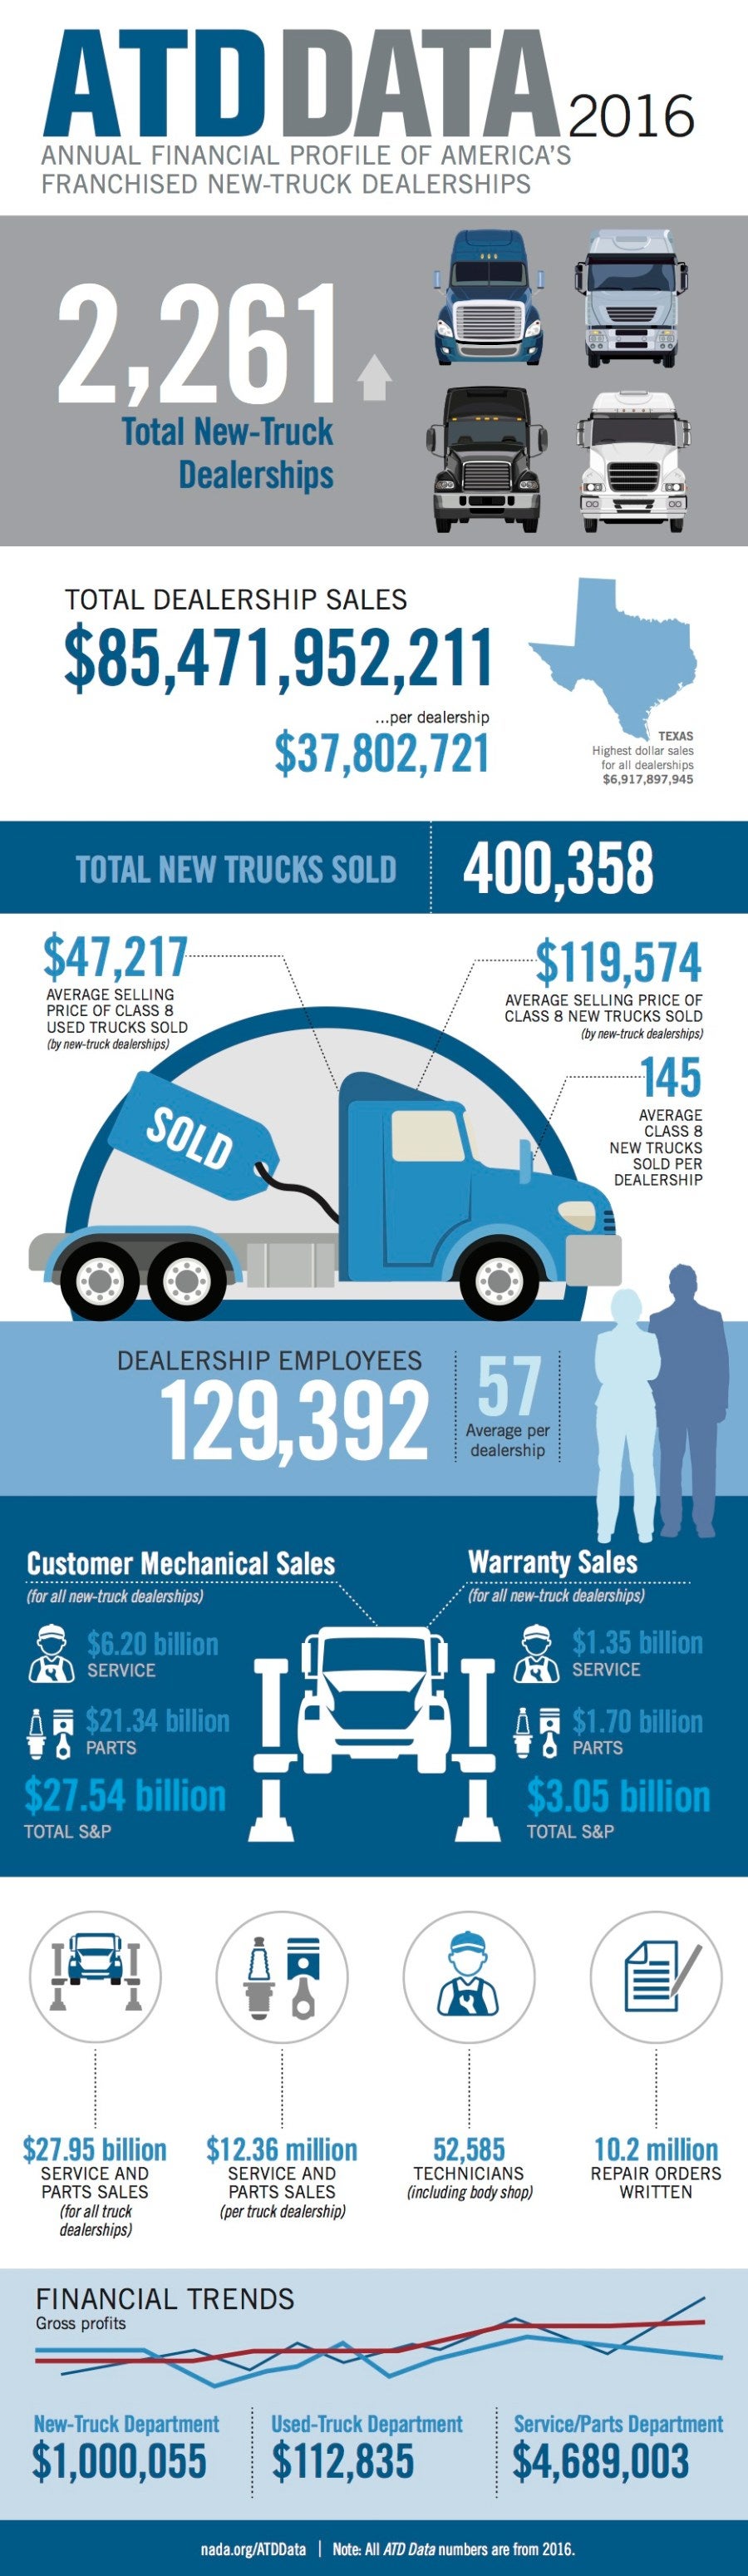 Employment at U.S. Commercial Truck Dealerships Up 5.6% in 2016